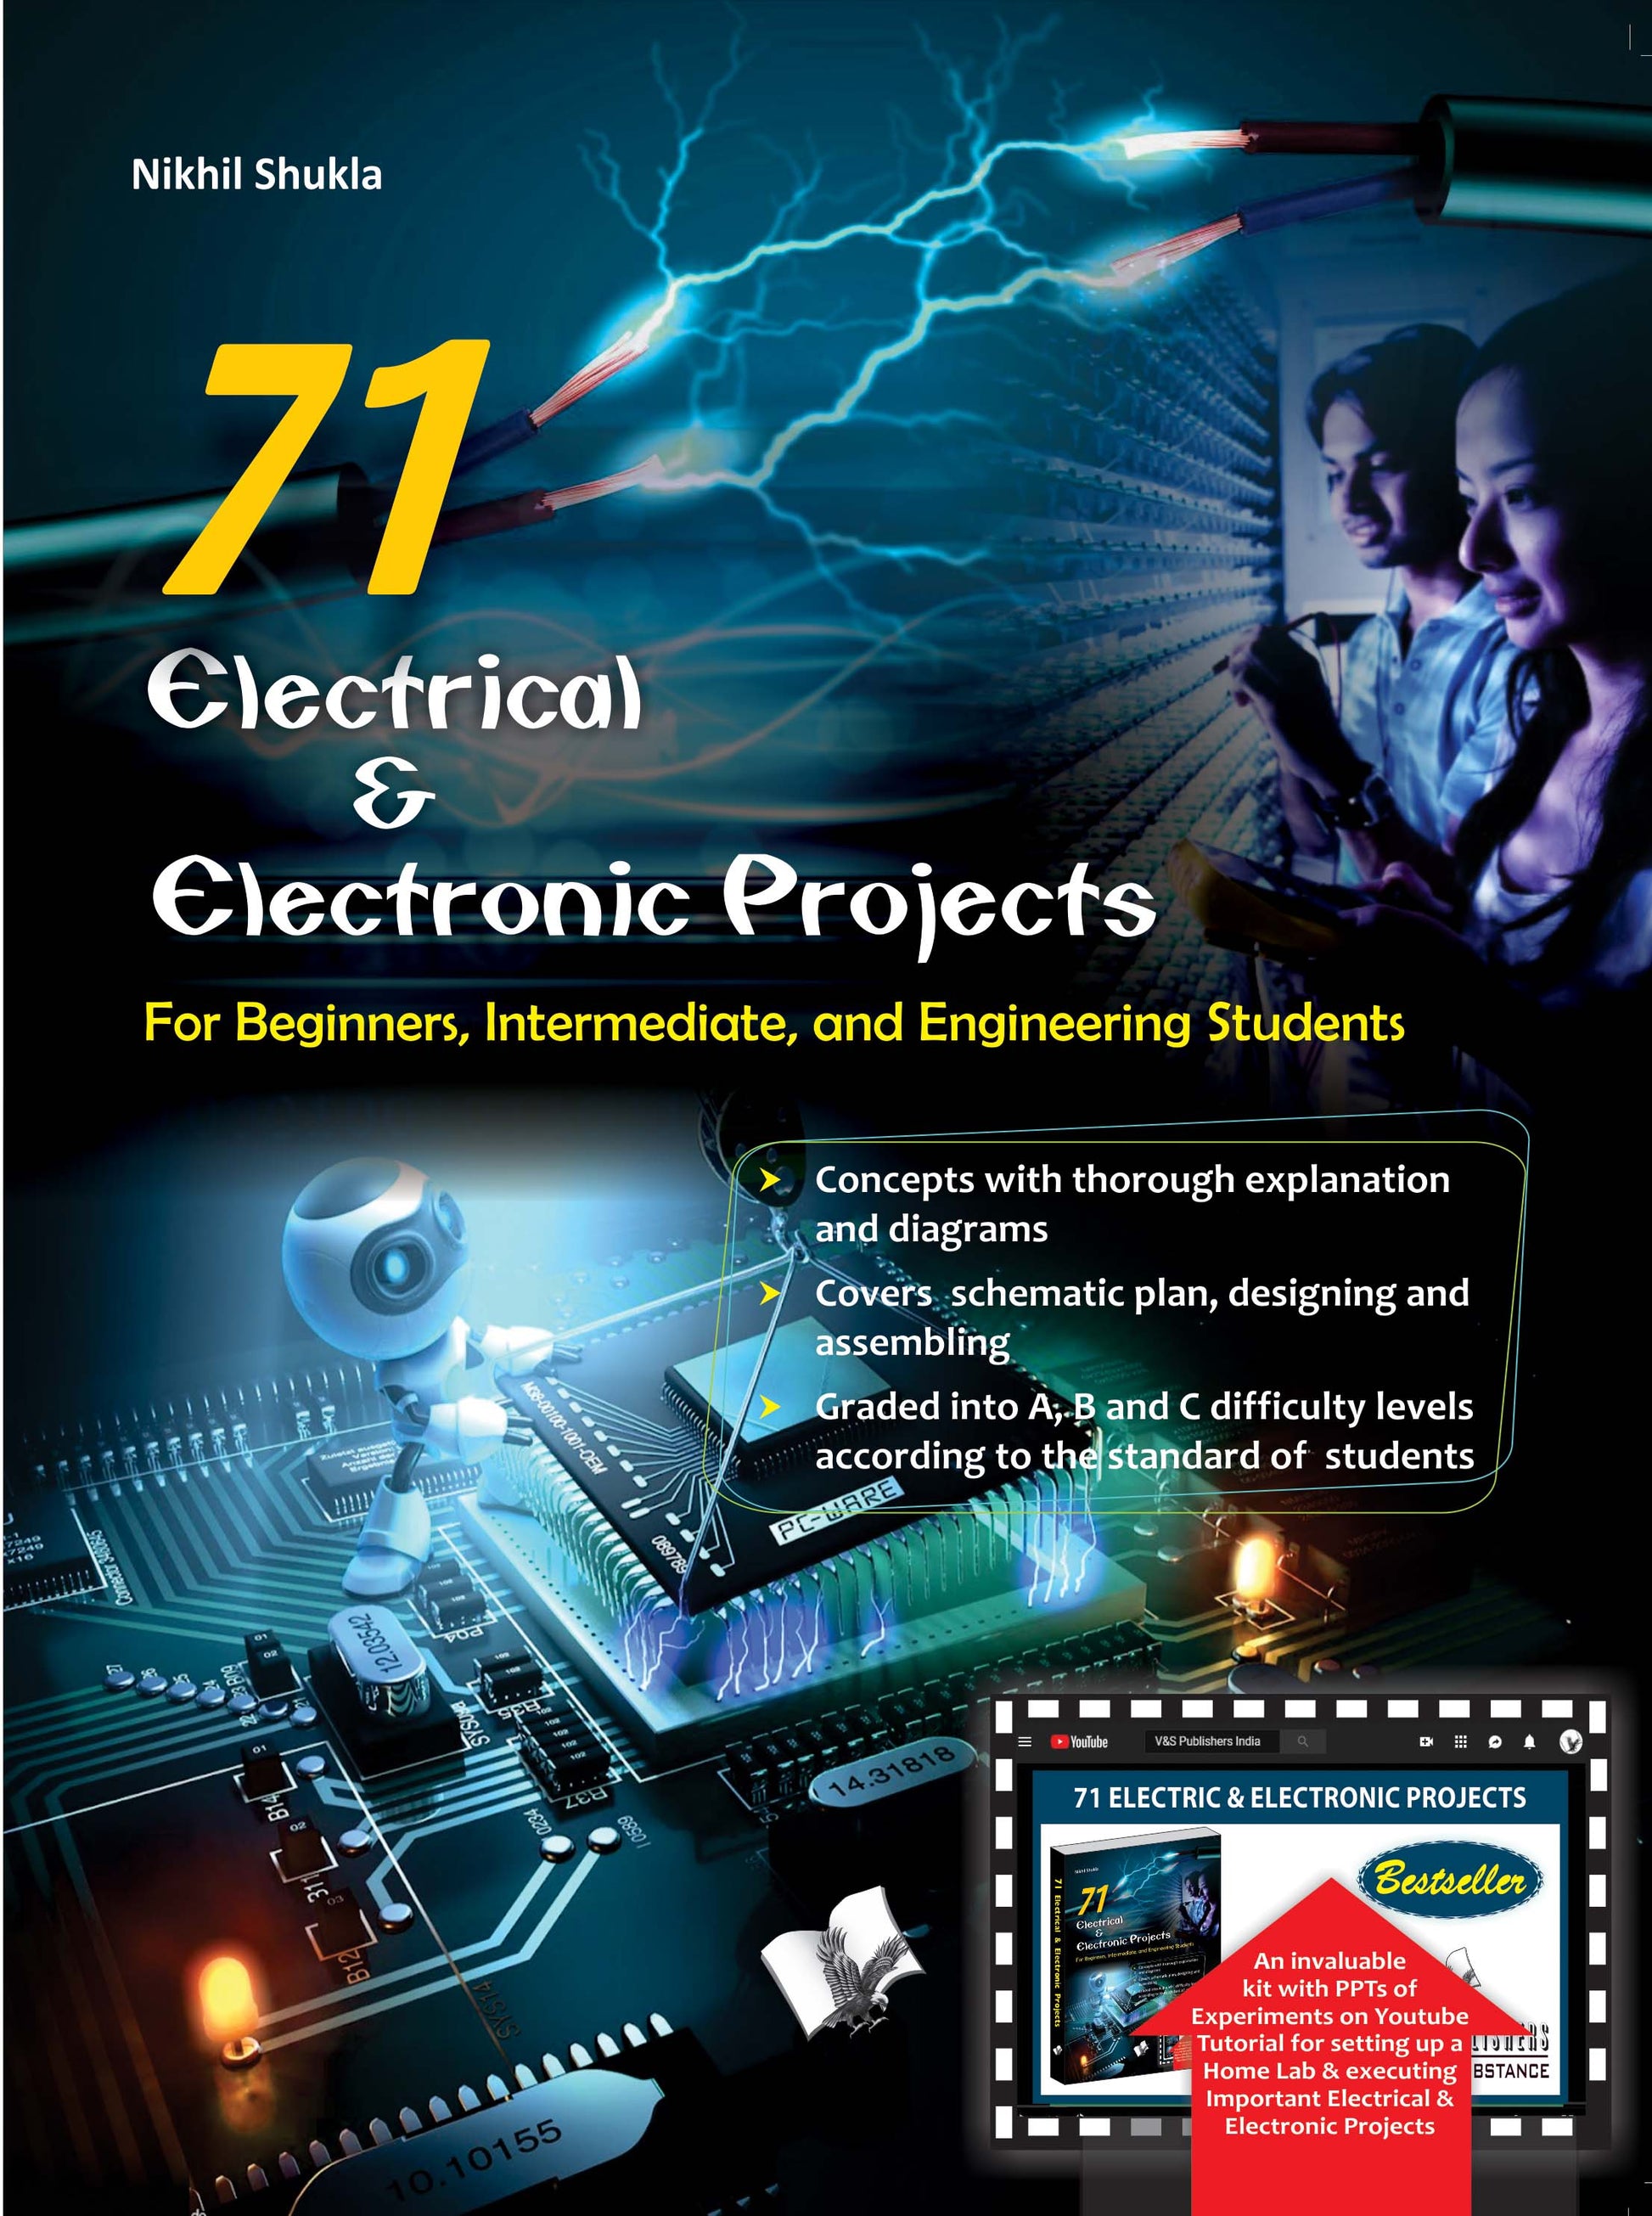 71 Electrical & Electronic Projects (With Youtube AV)